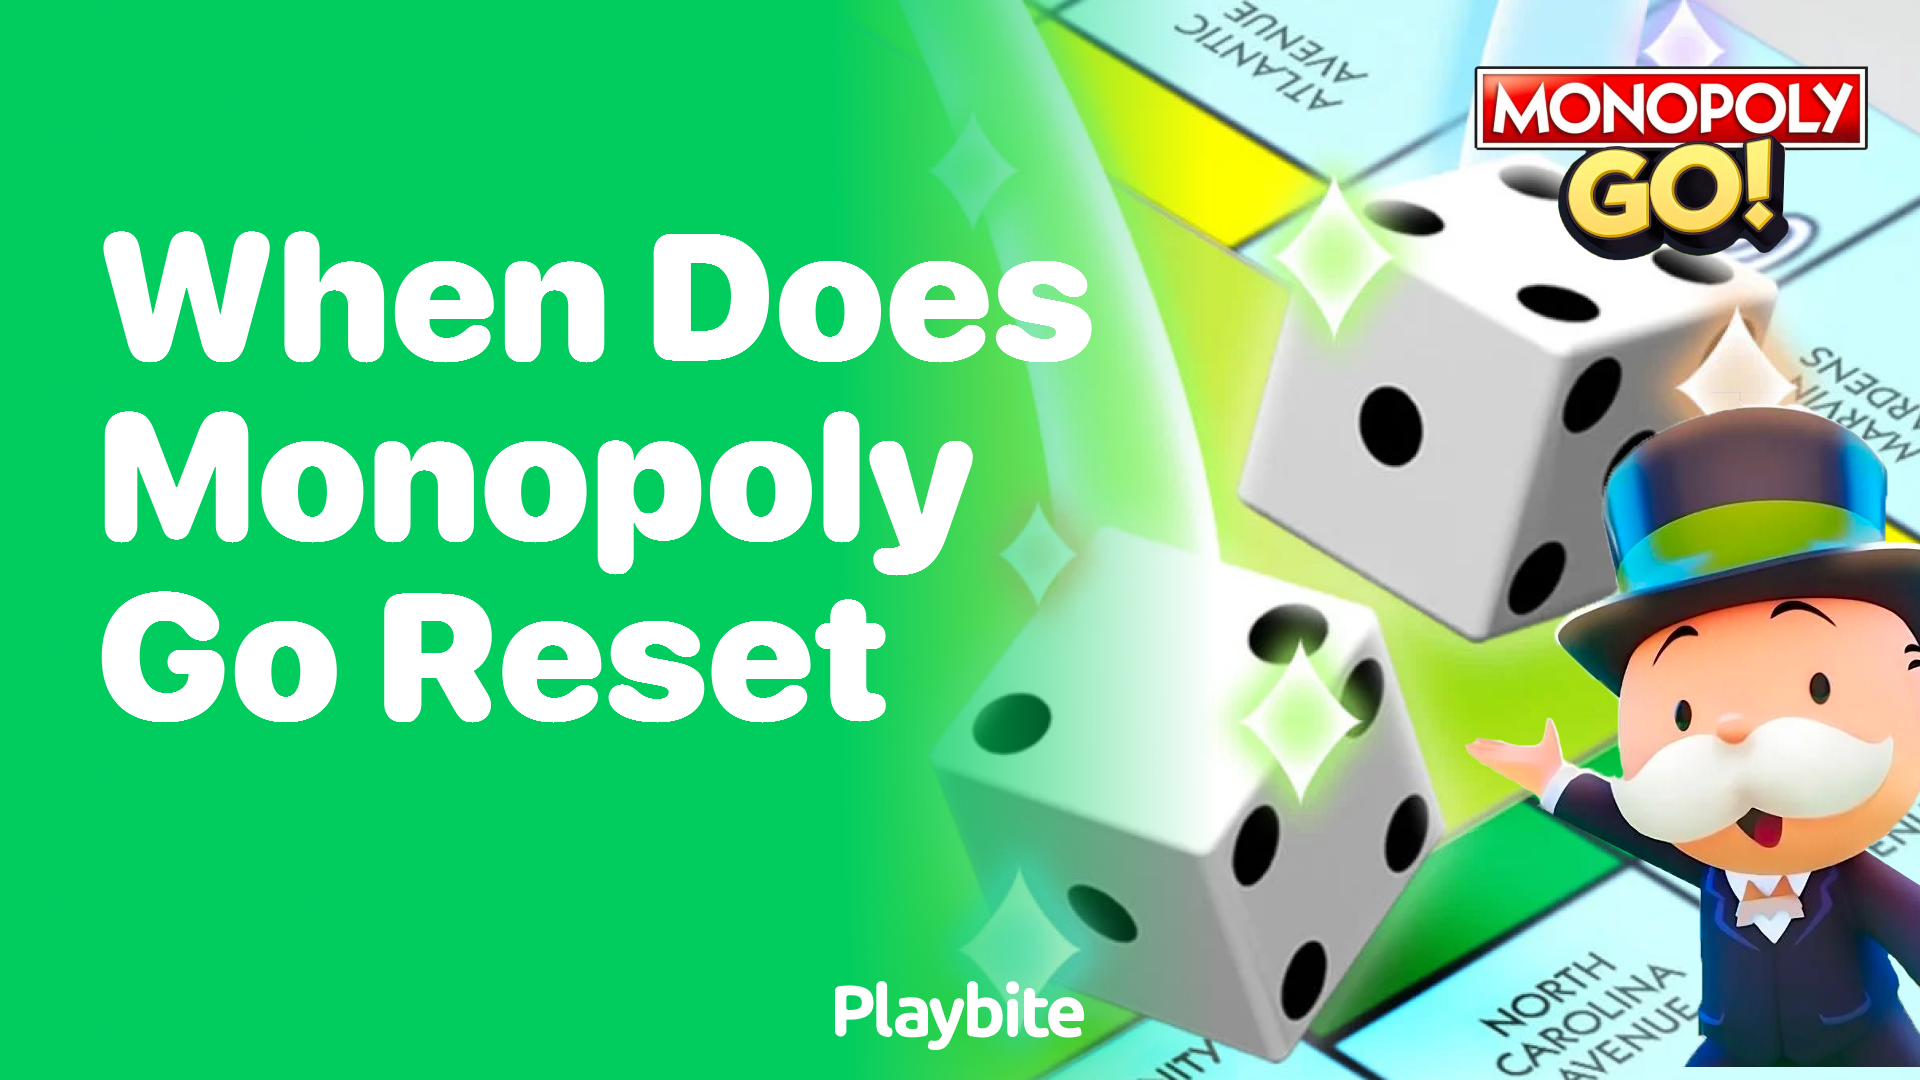 When Does Monopoly Go Reset?